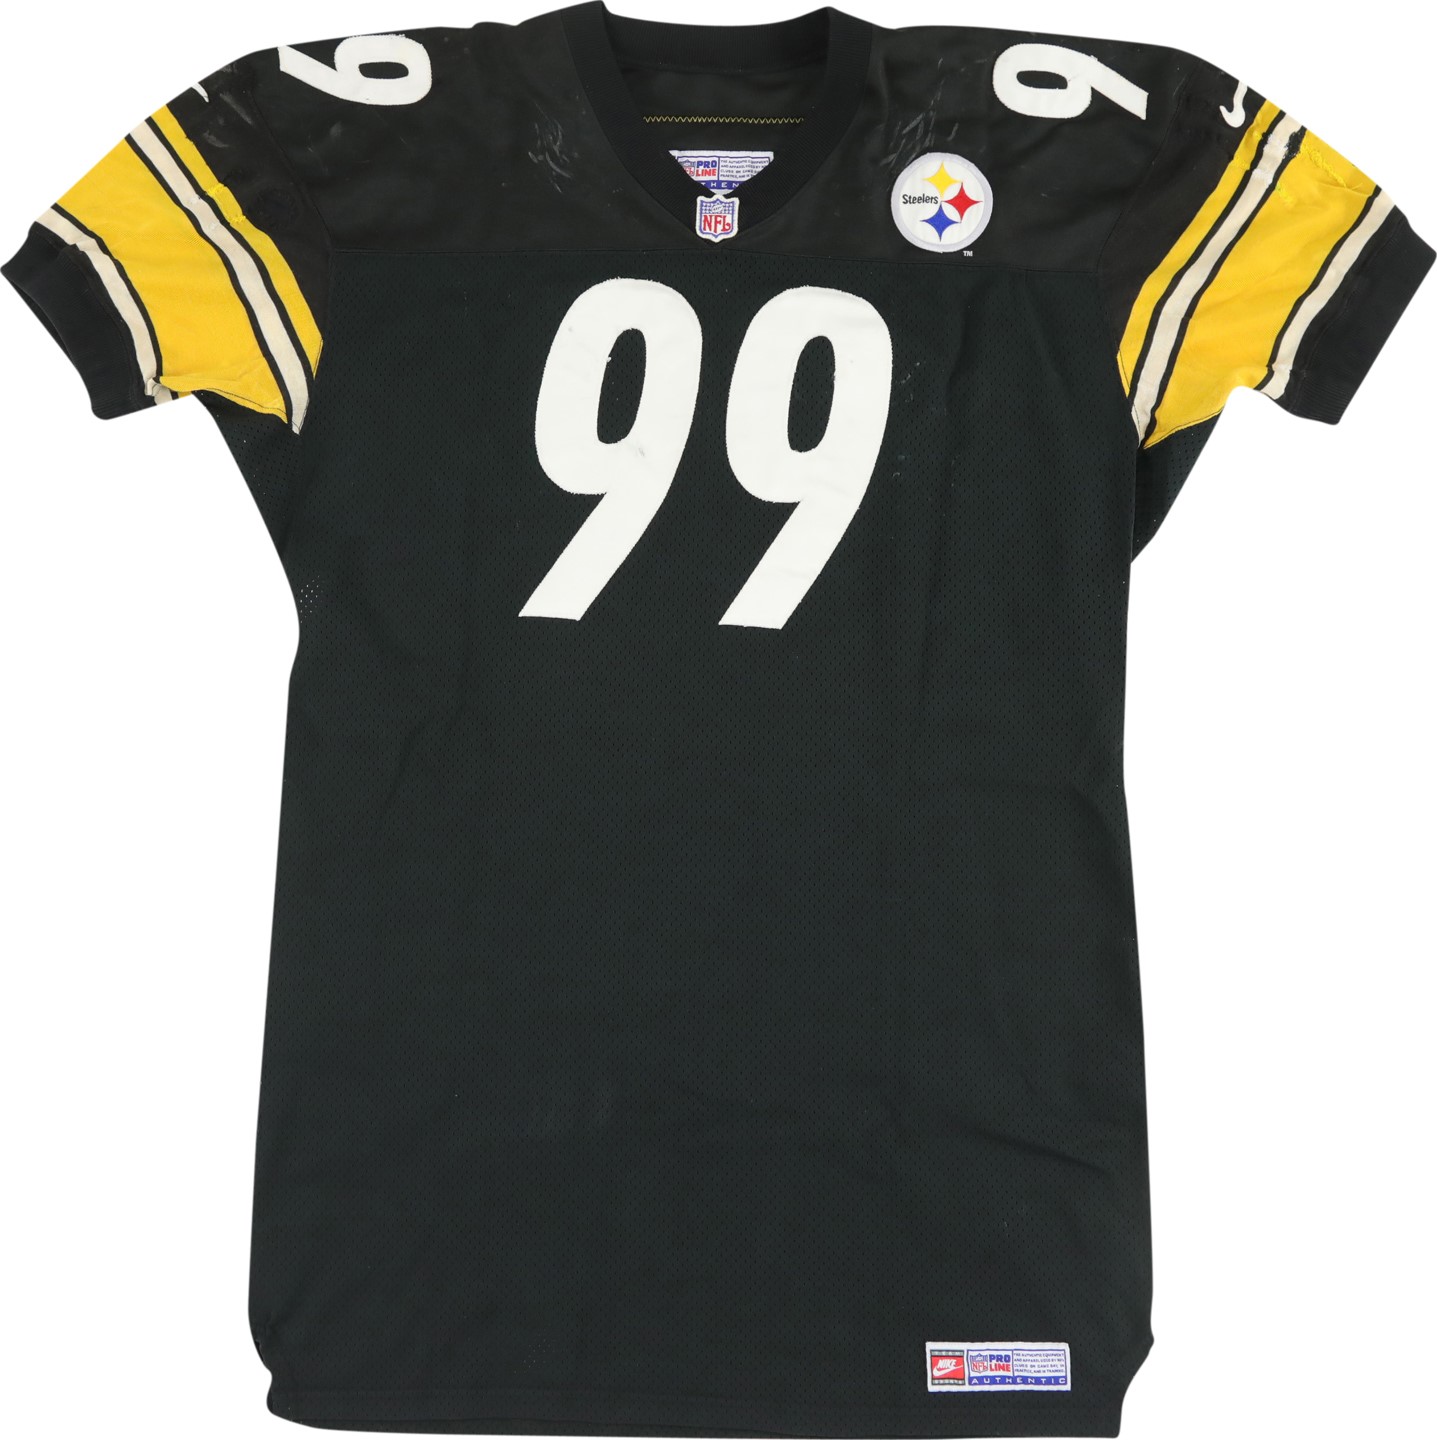 The Pittsburgh Steelers Game Worn Jersey Archive - 1998 Levon Kirkland Game Worn Pittsburgh Steelers Jersey (Photo-Matched to Four Games)